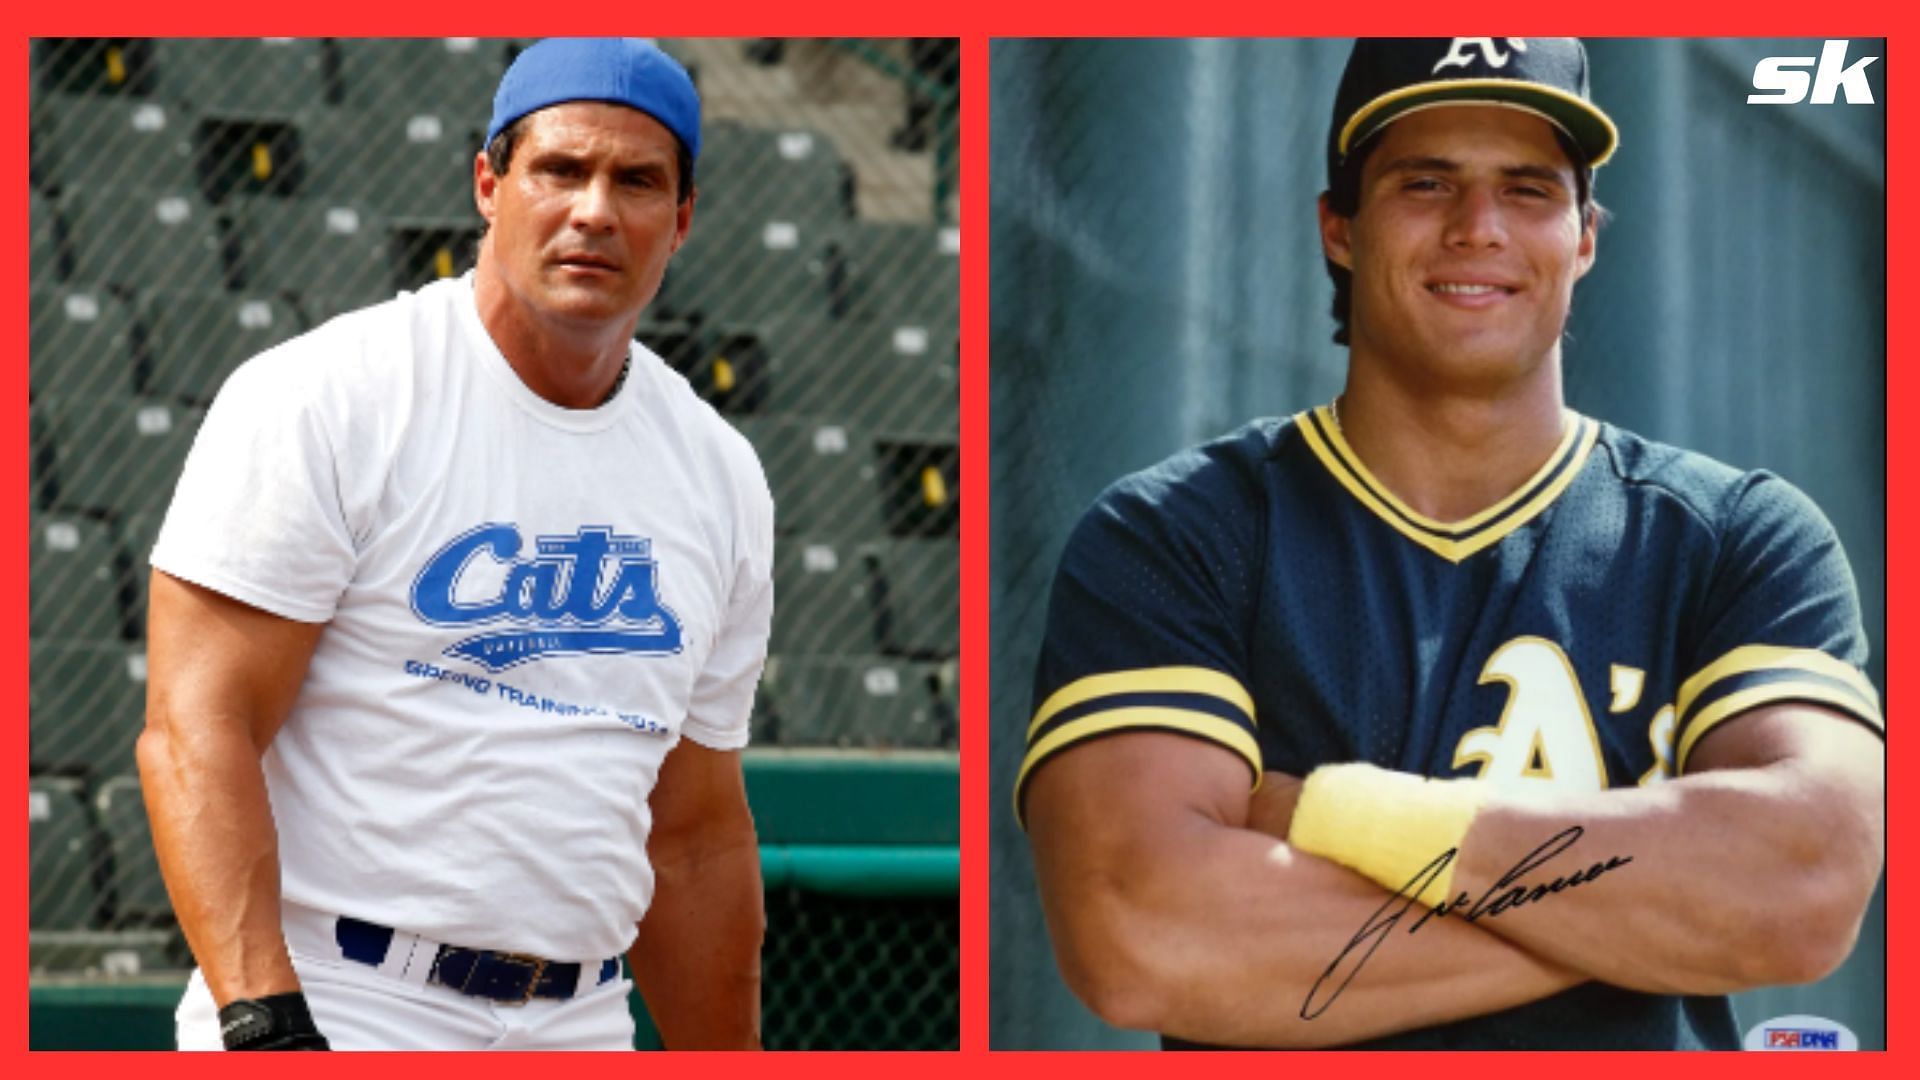 Jose Canseco wishes he never wrote book Juiced about steroids - Sports  Illustrated